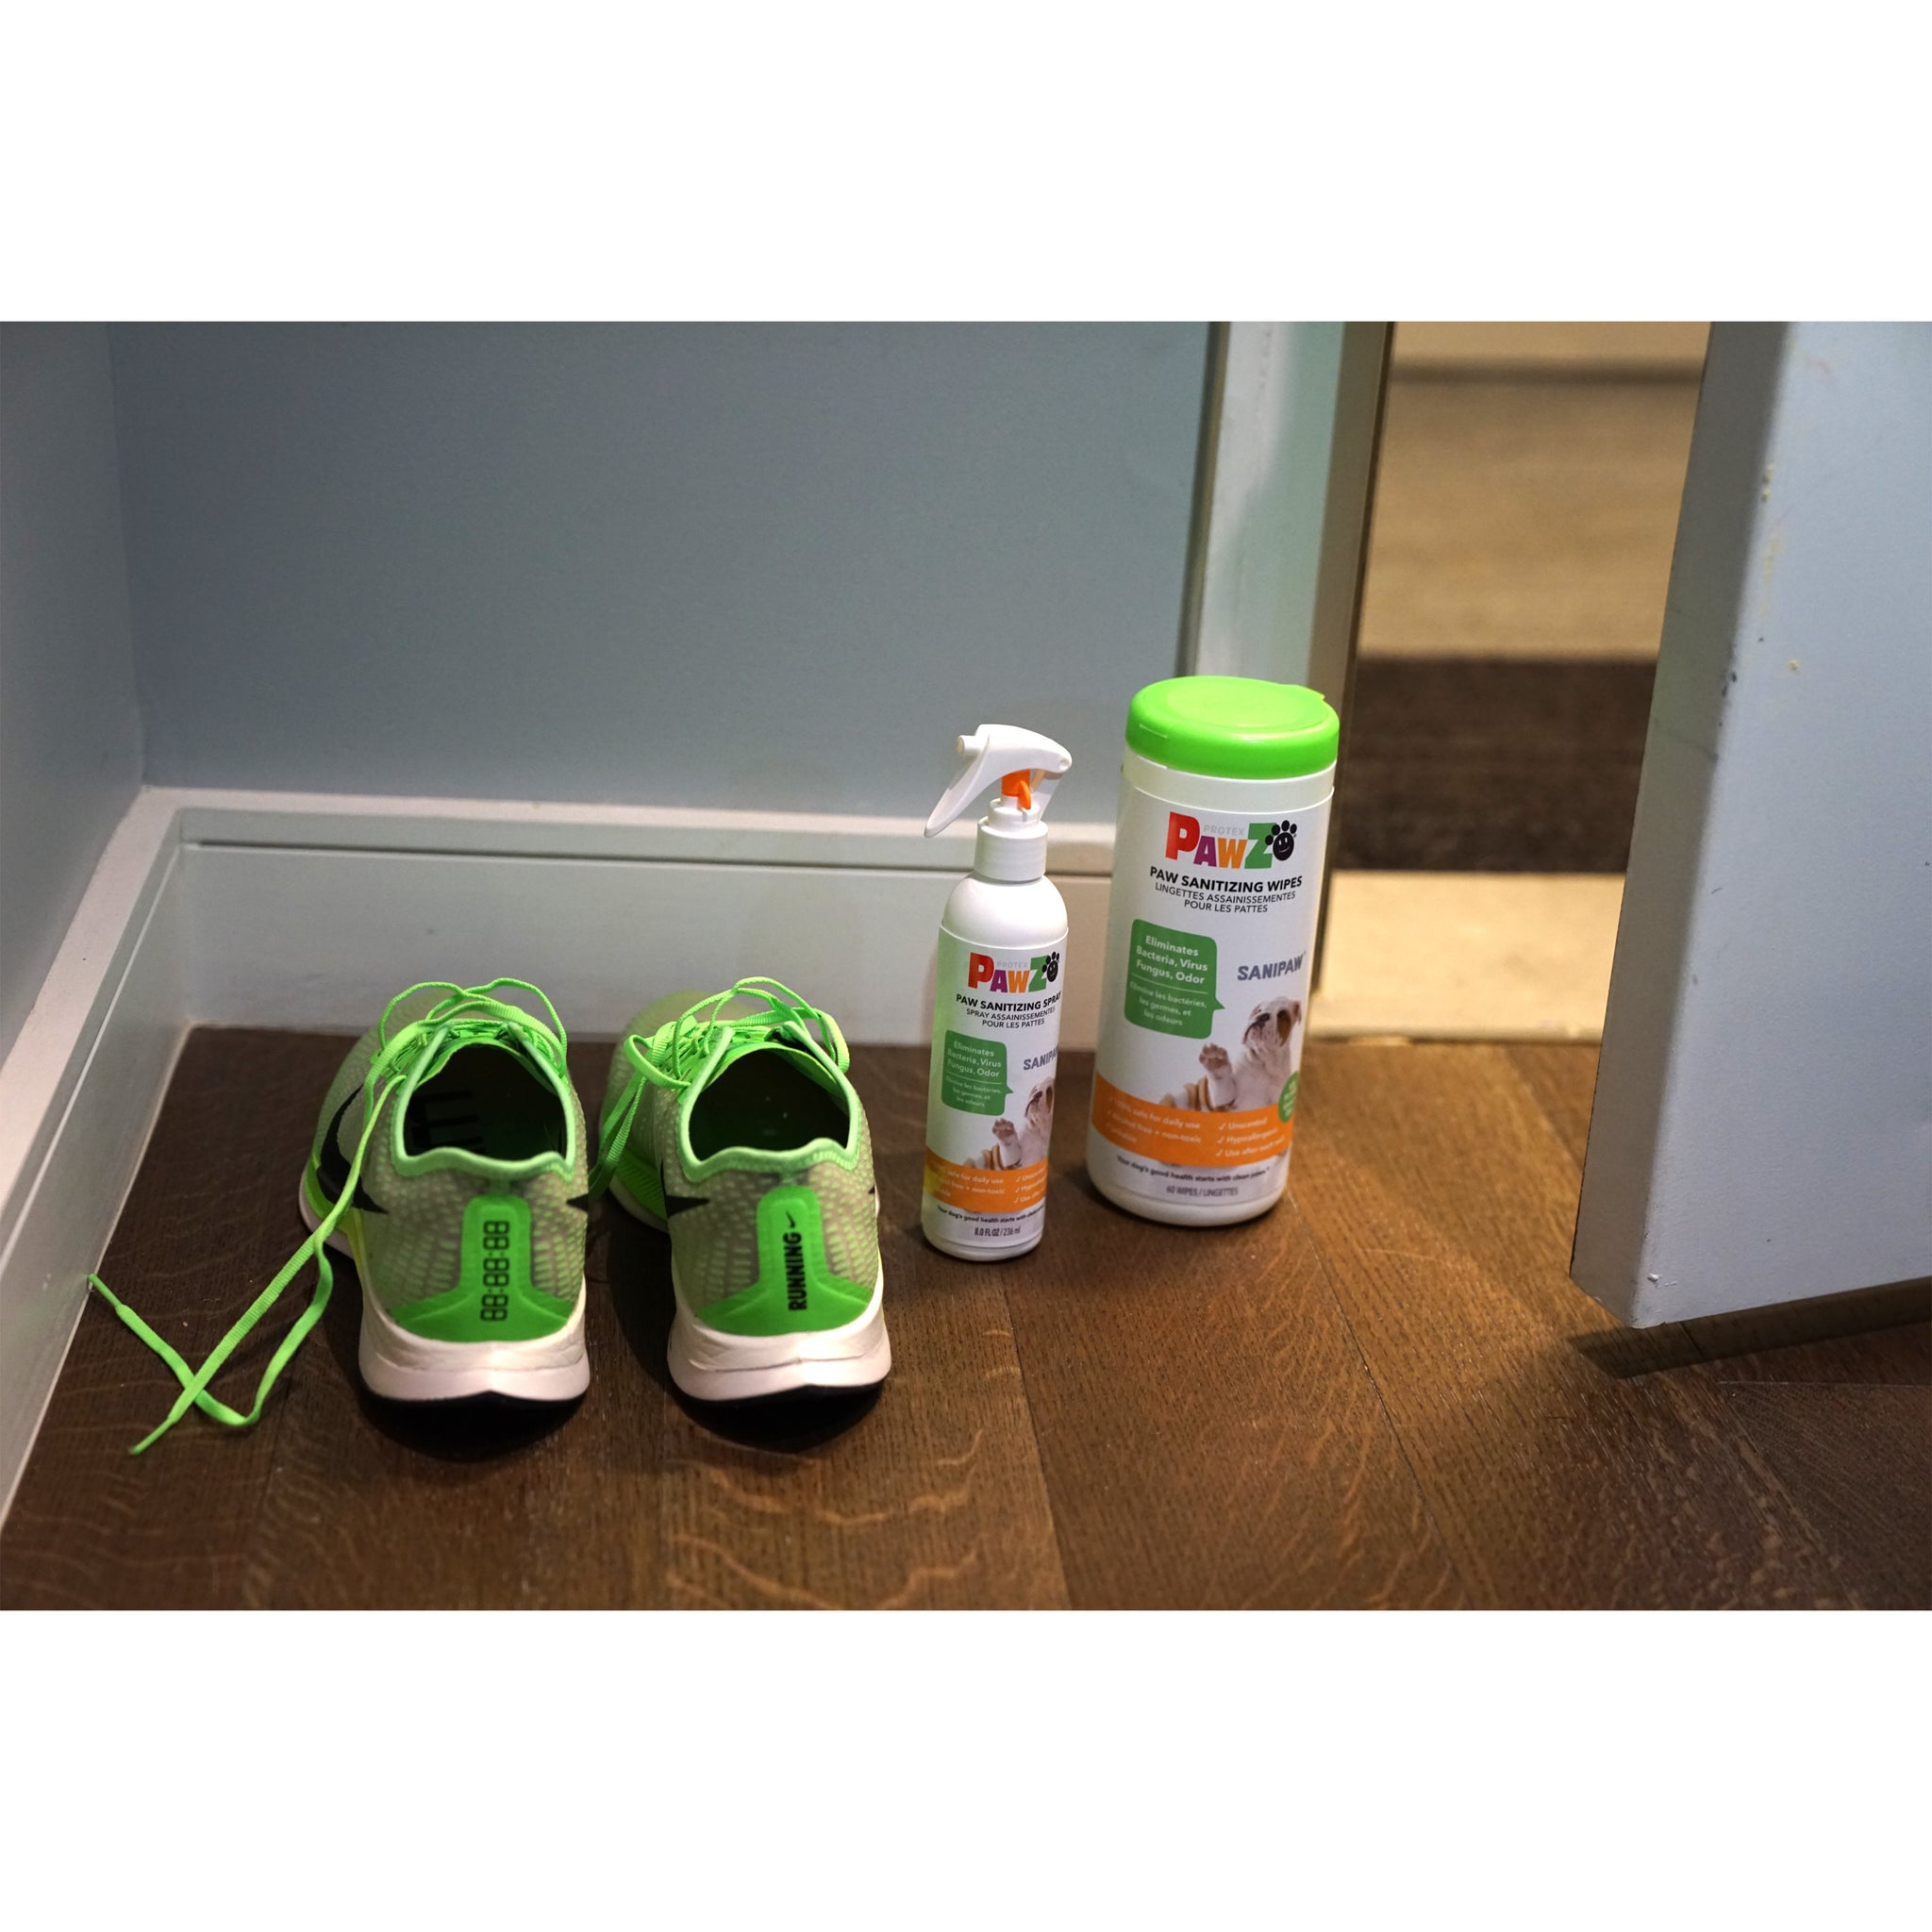 Wipes & Spray - Sanipaw "Improved Dispenser" | SHIPPING NOW!